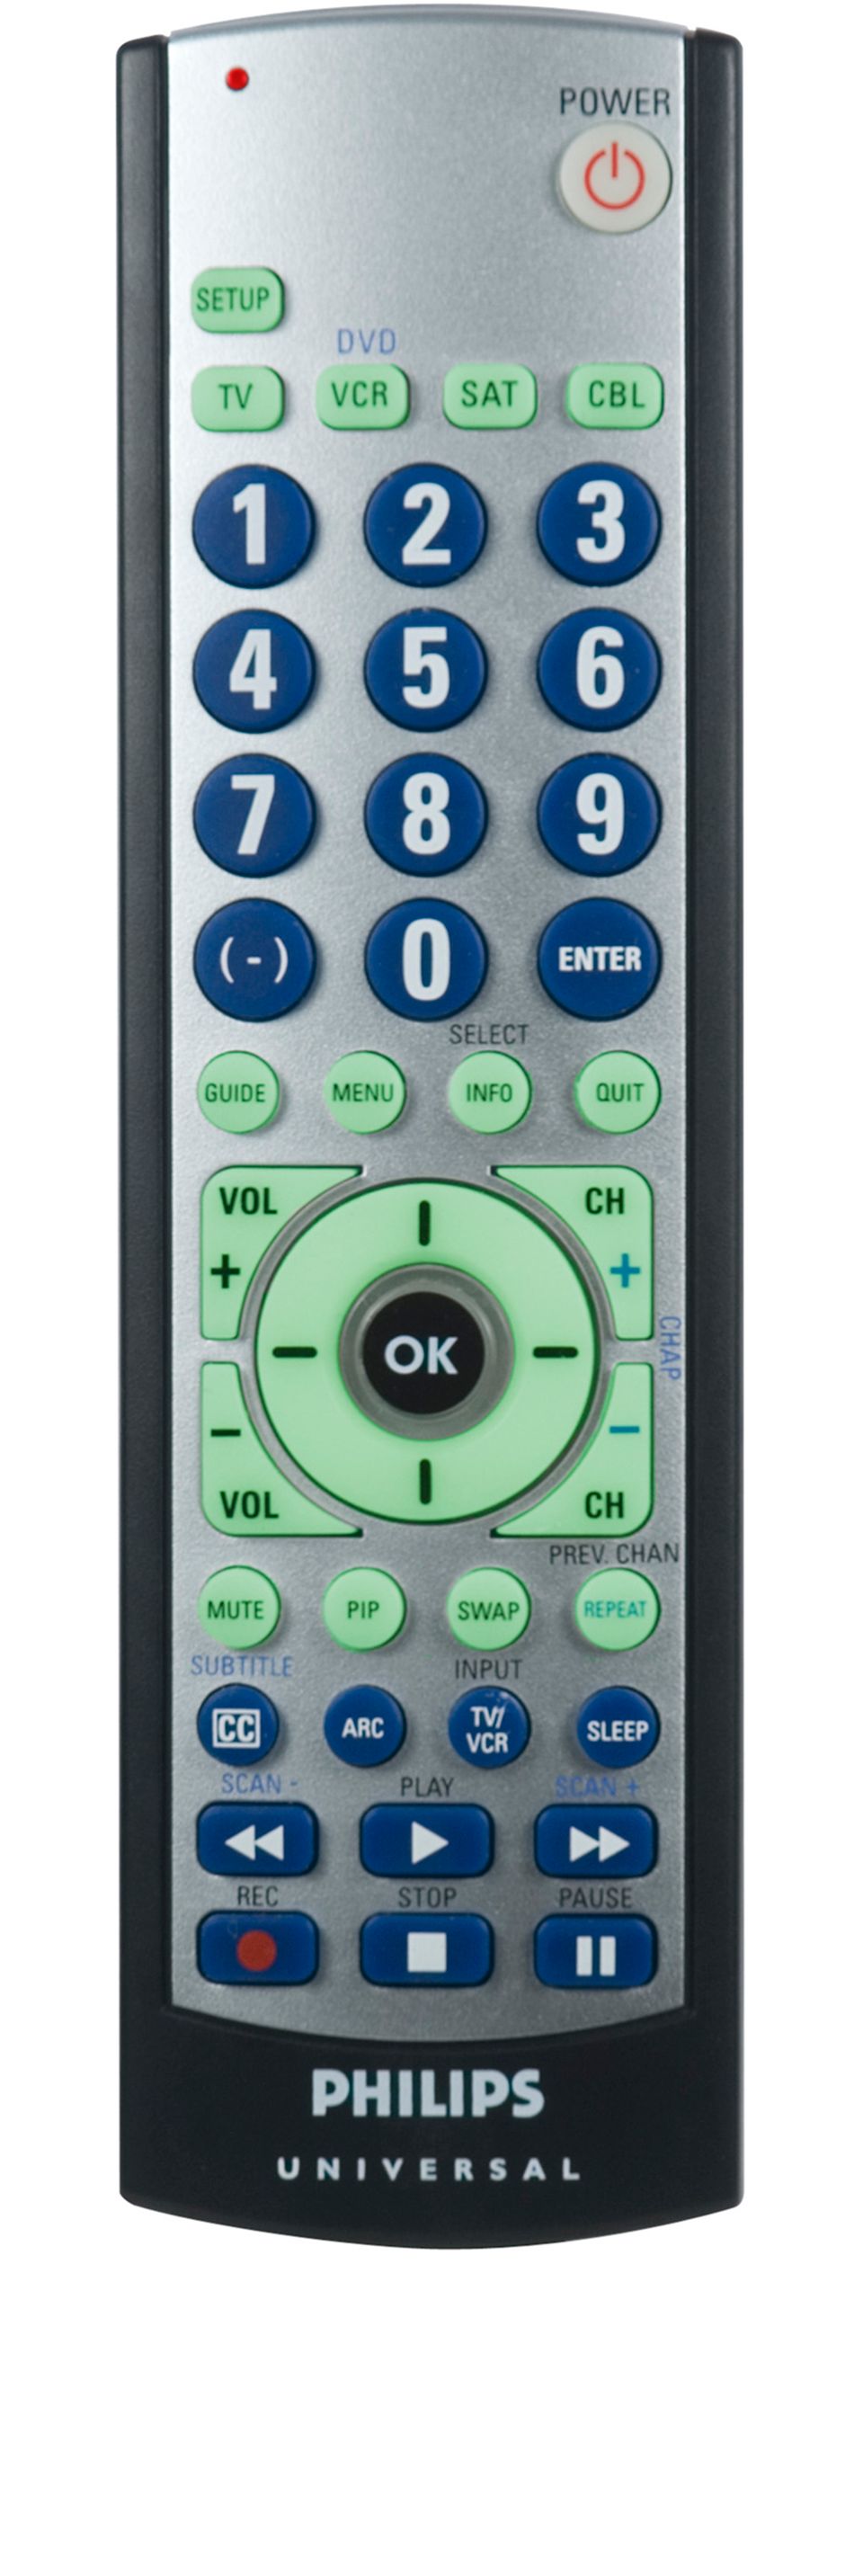 Replacement remote.